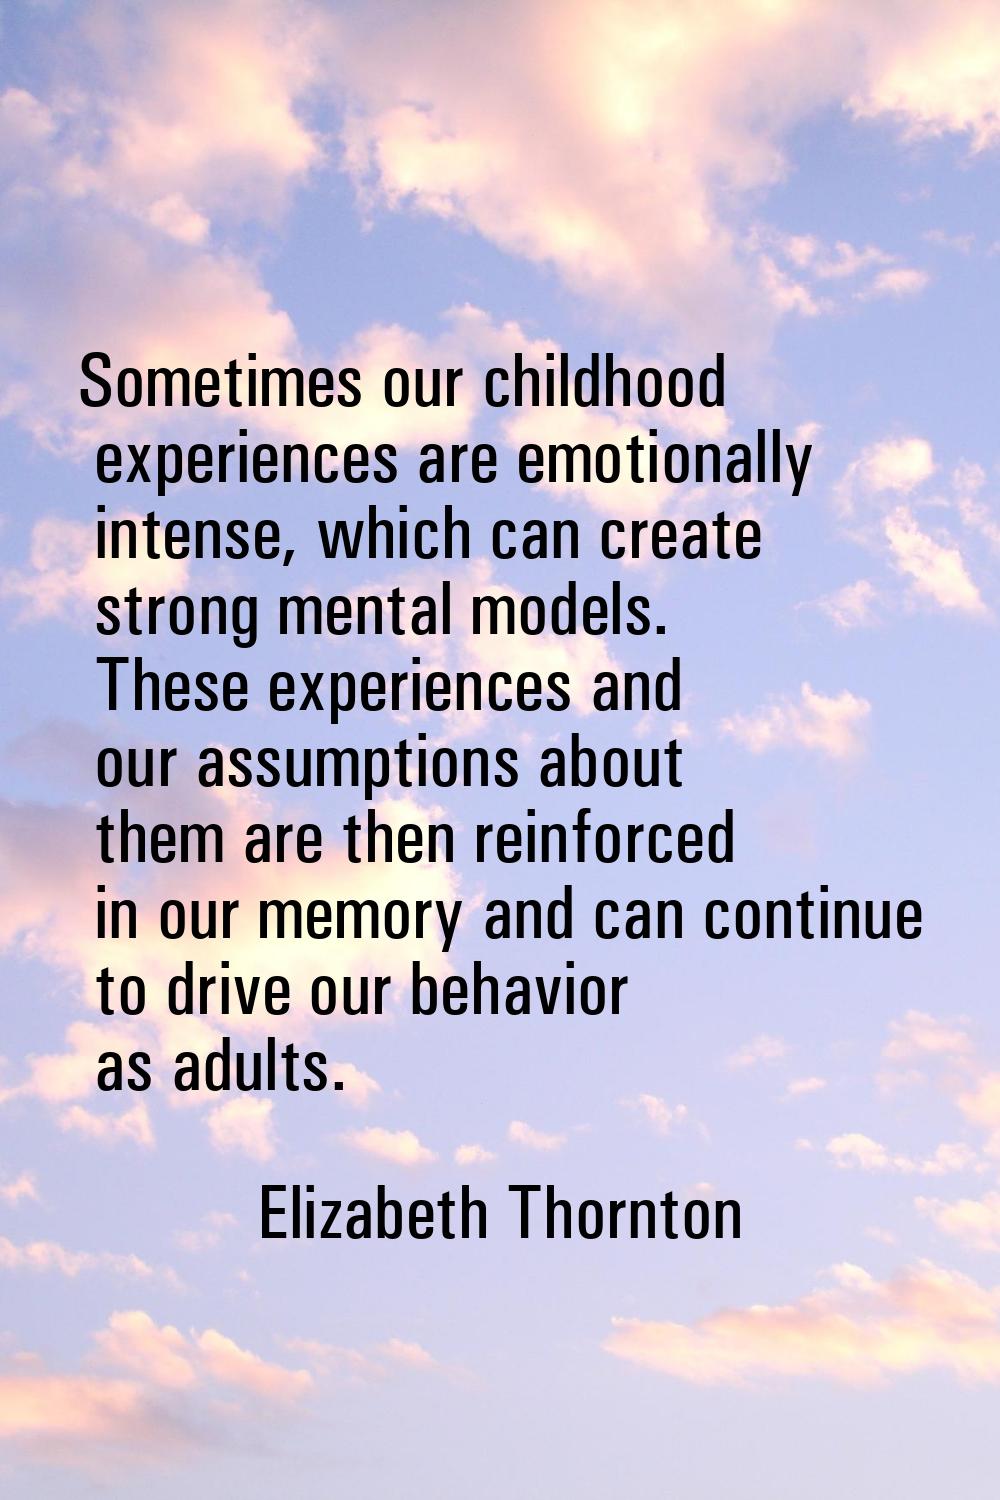 Sometimes our childhood experiences are emotionally intense, which can create strong mental models.